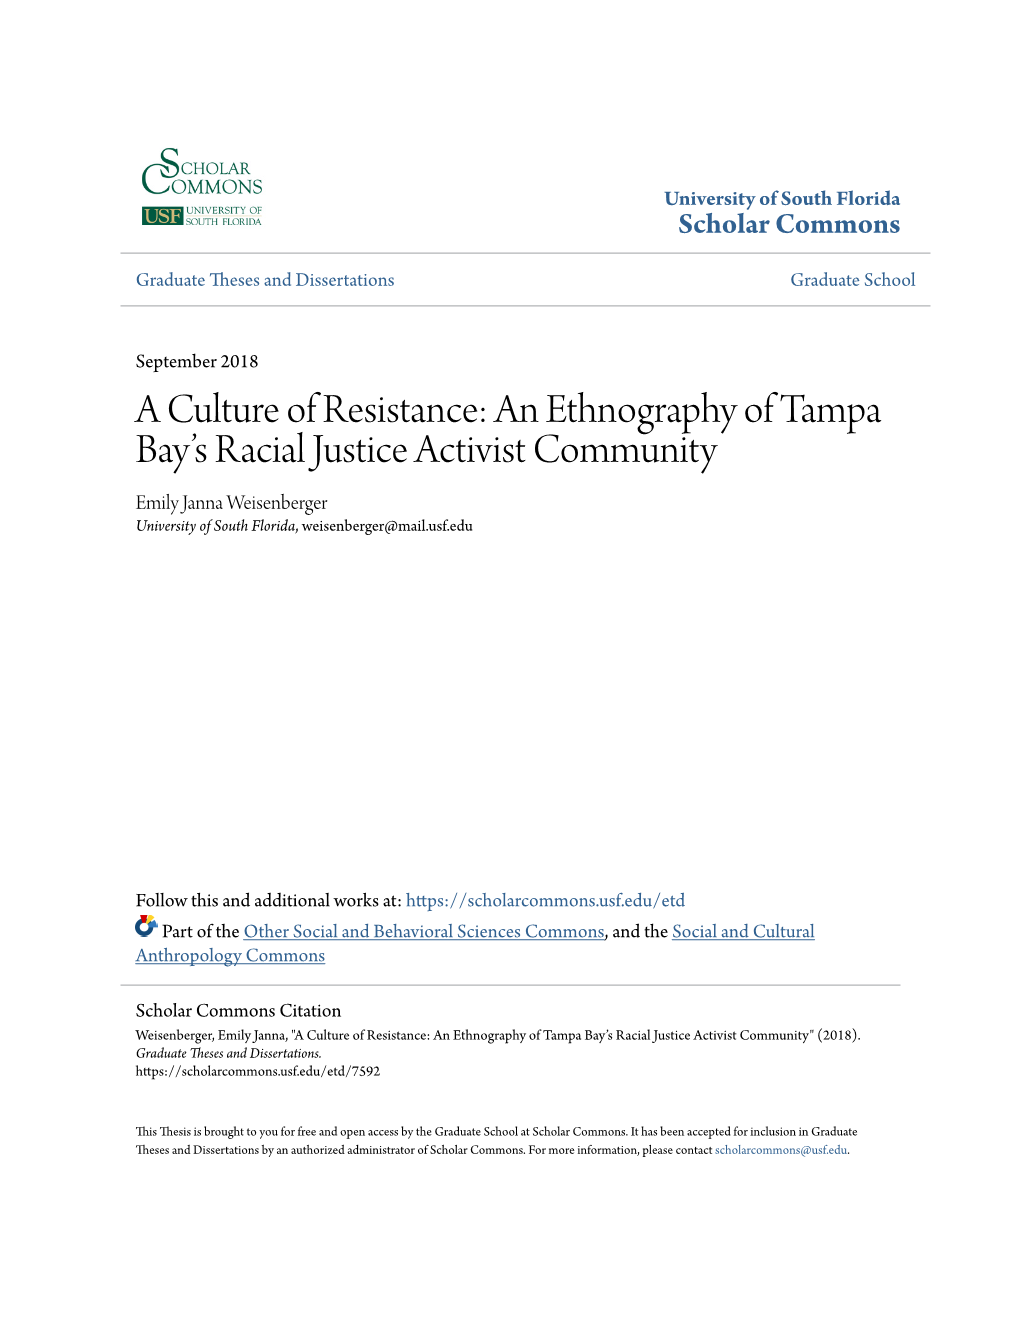 An Ethnography of Tampa Bay's Racial